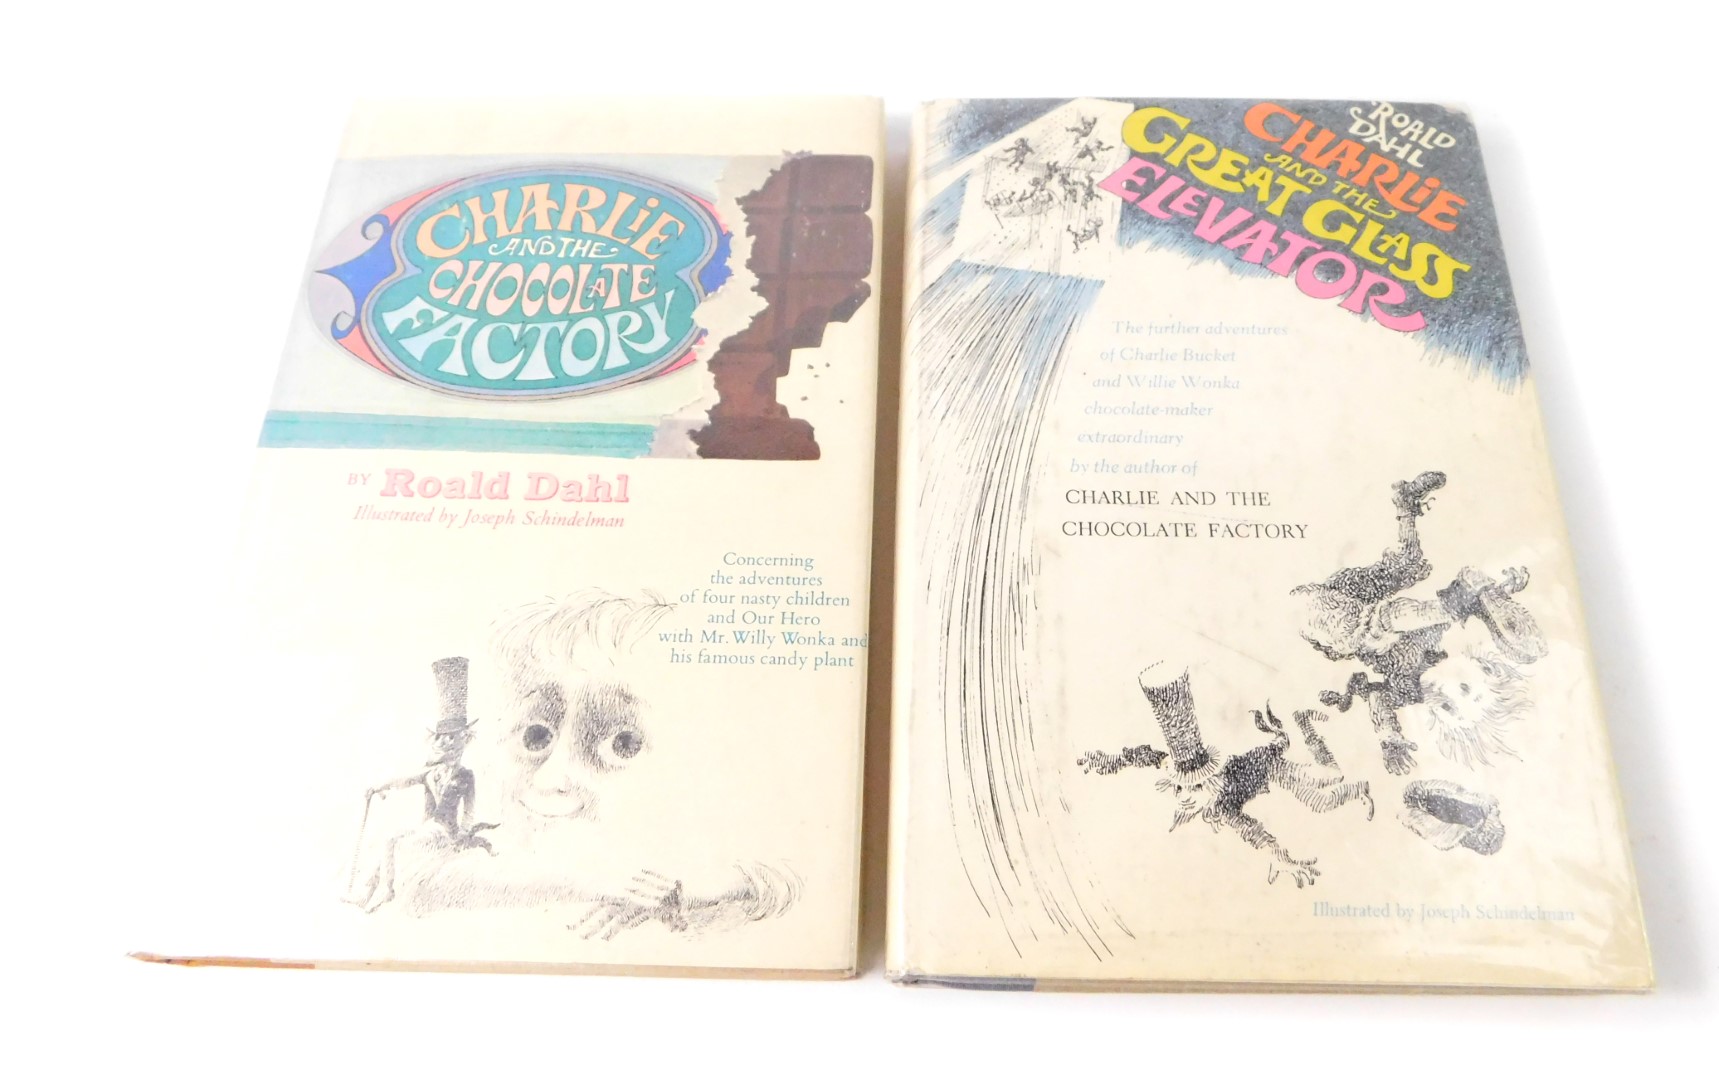 Roald Dahl. Charlie and The Chocolate Factory, first edition with dust wrapper, illustrated by - Image 2 of 6